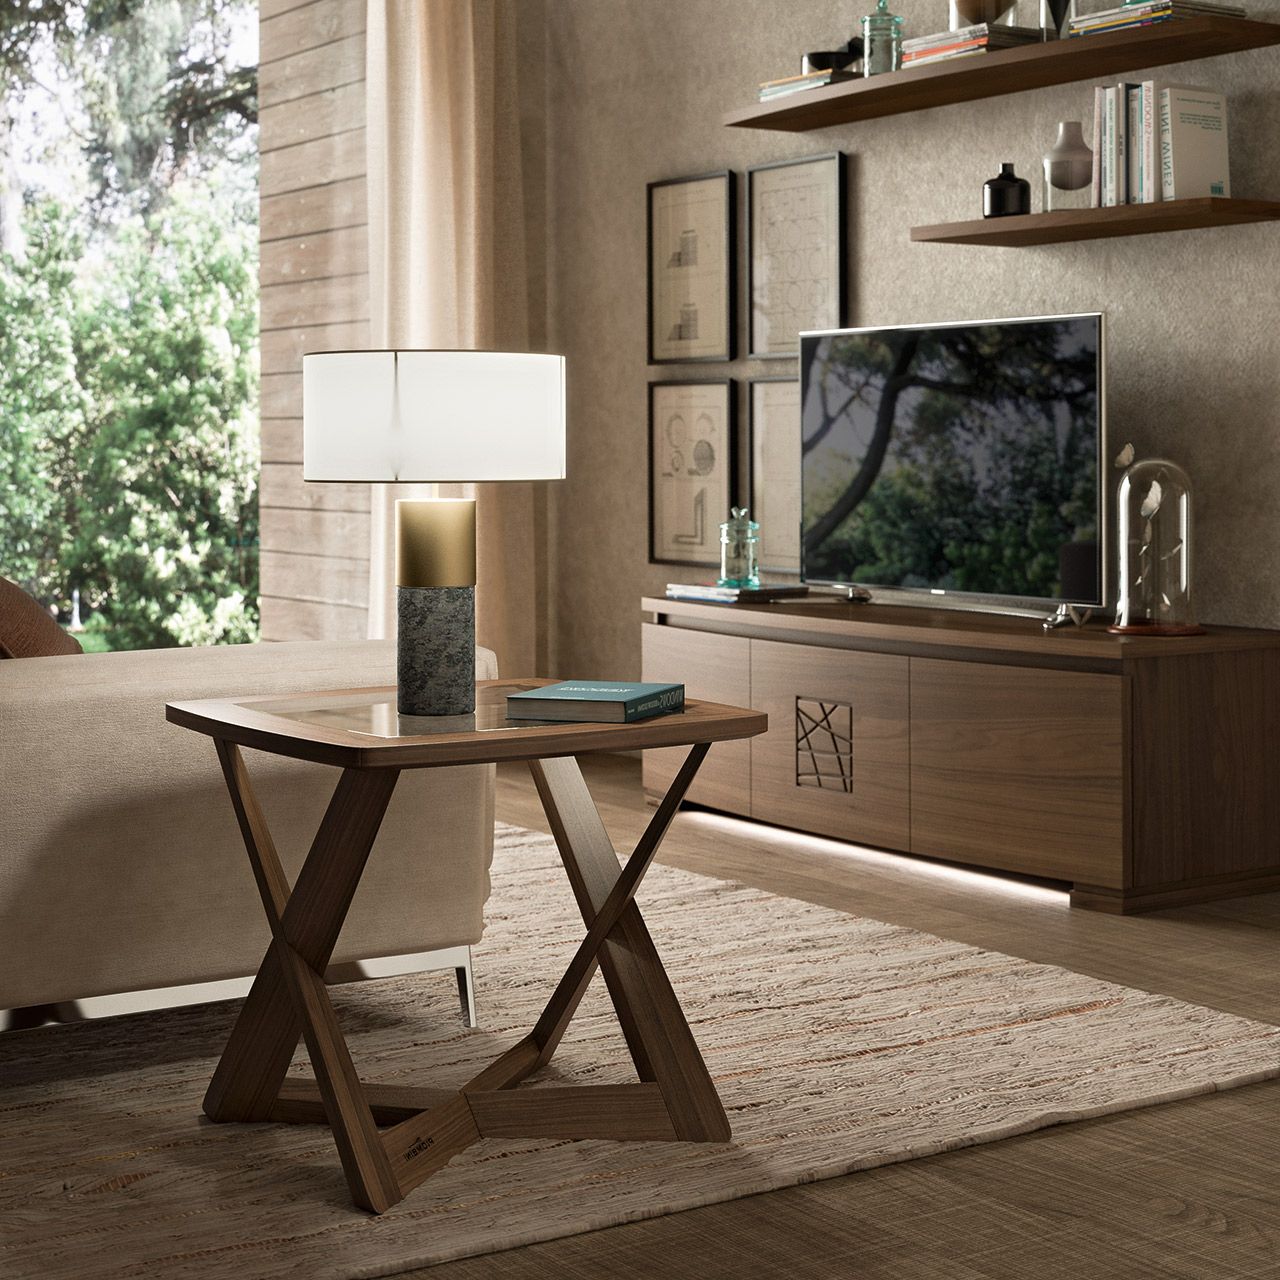 Modern Square Walnut Coffee Table With Tempered Glass Top – Mobili Piombini Pertaining To Most Recent Tempered Glass Top Coffee Tables (View 8 of 20)